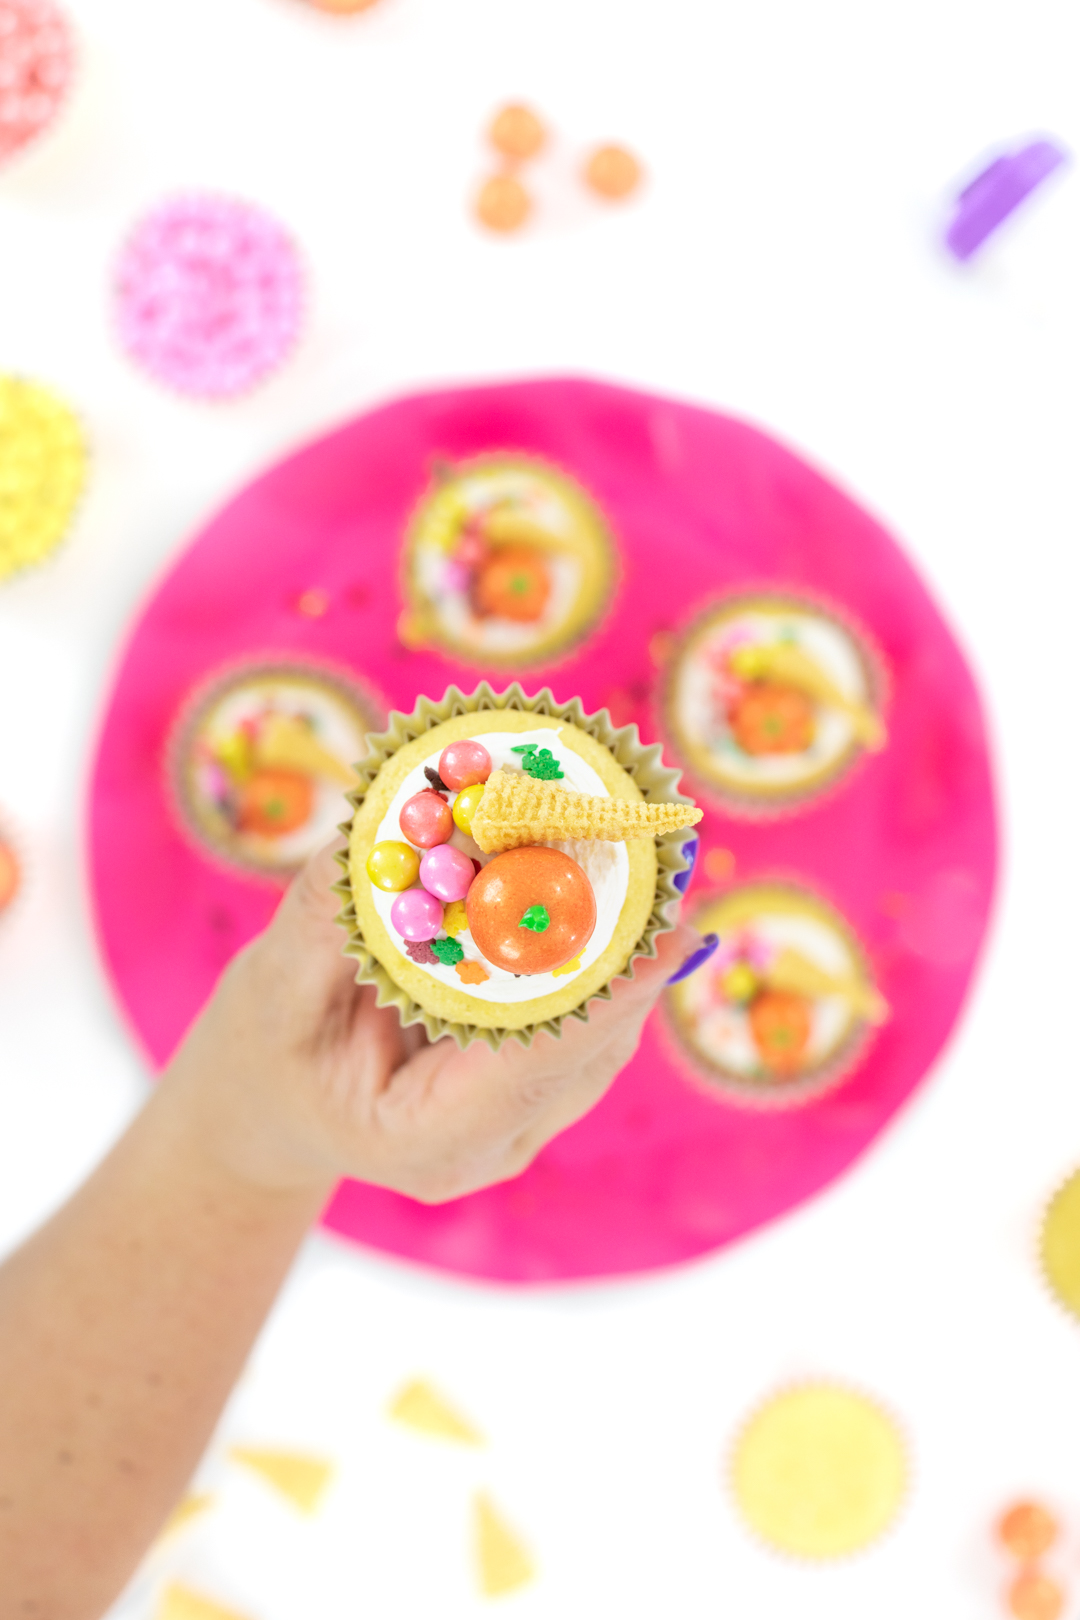 Cute cornucopia cupcakes made with shimmer candies.